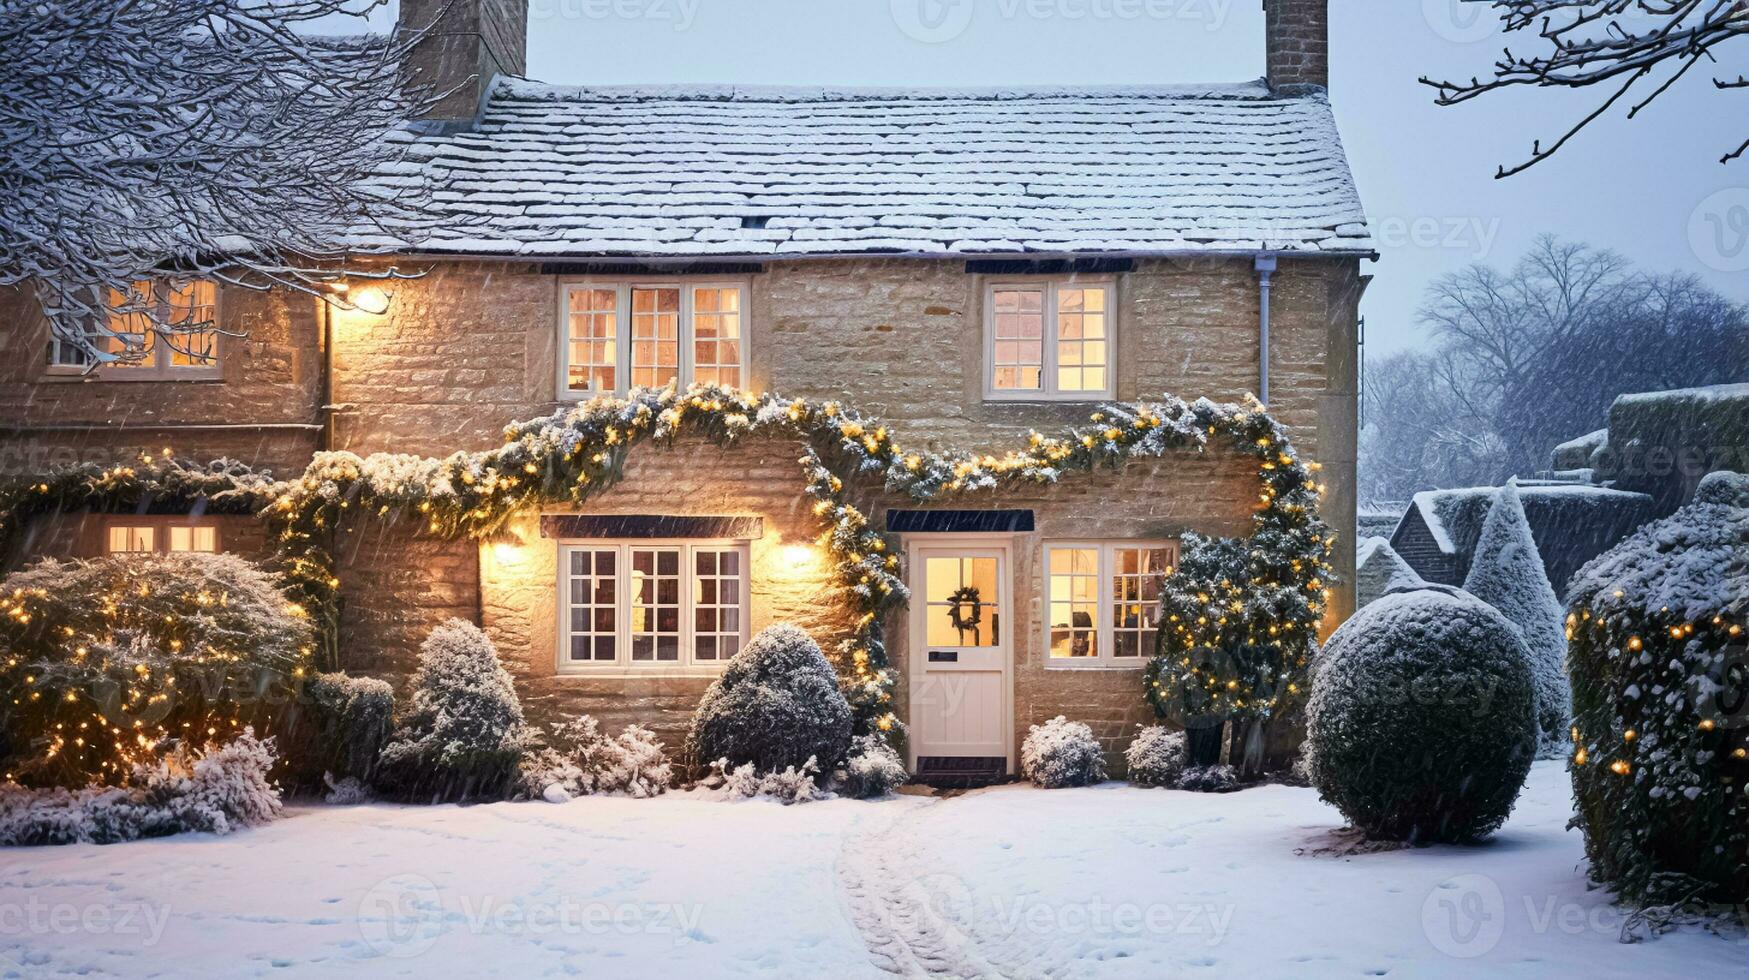 Christmas in the countryside, cottage and garden decorated for holidays on a snowy winter evening with snow and holiday lights, English country styling photo